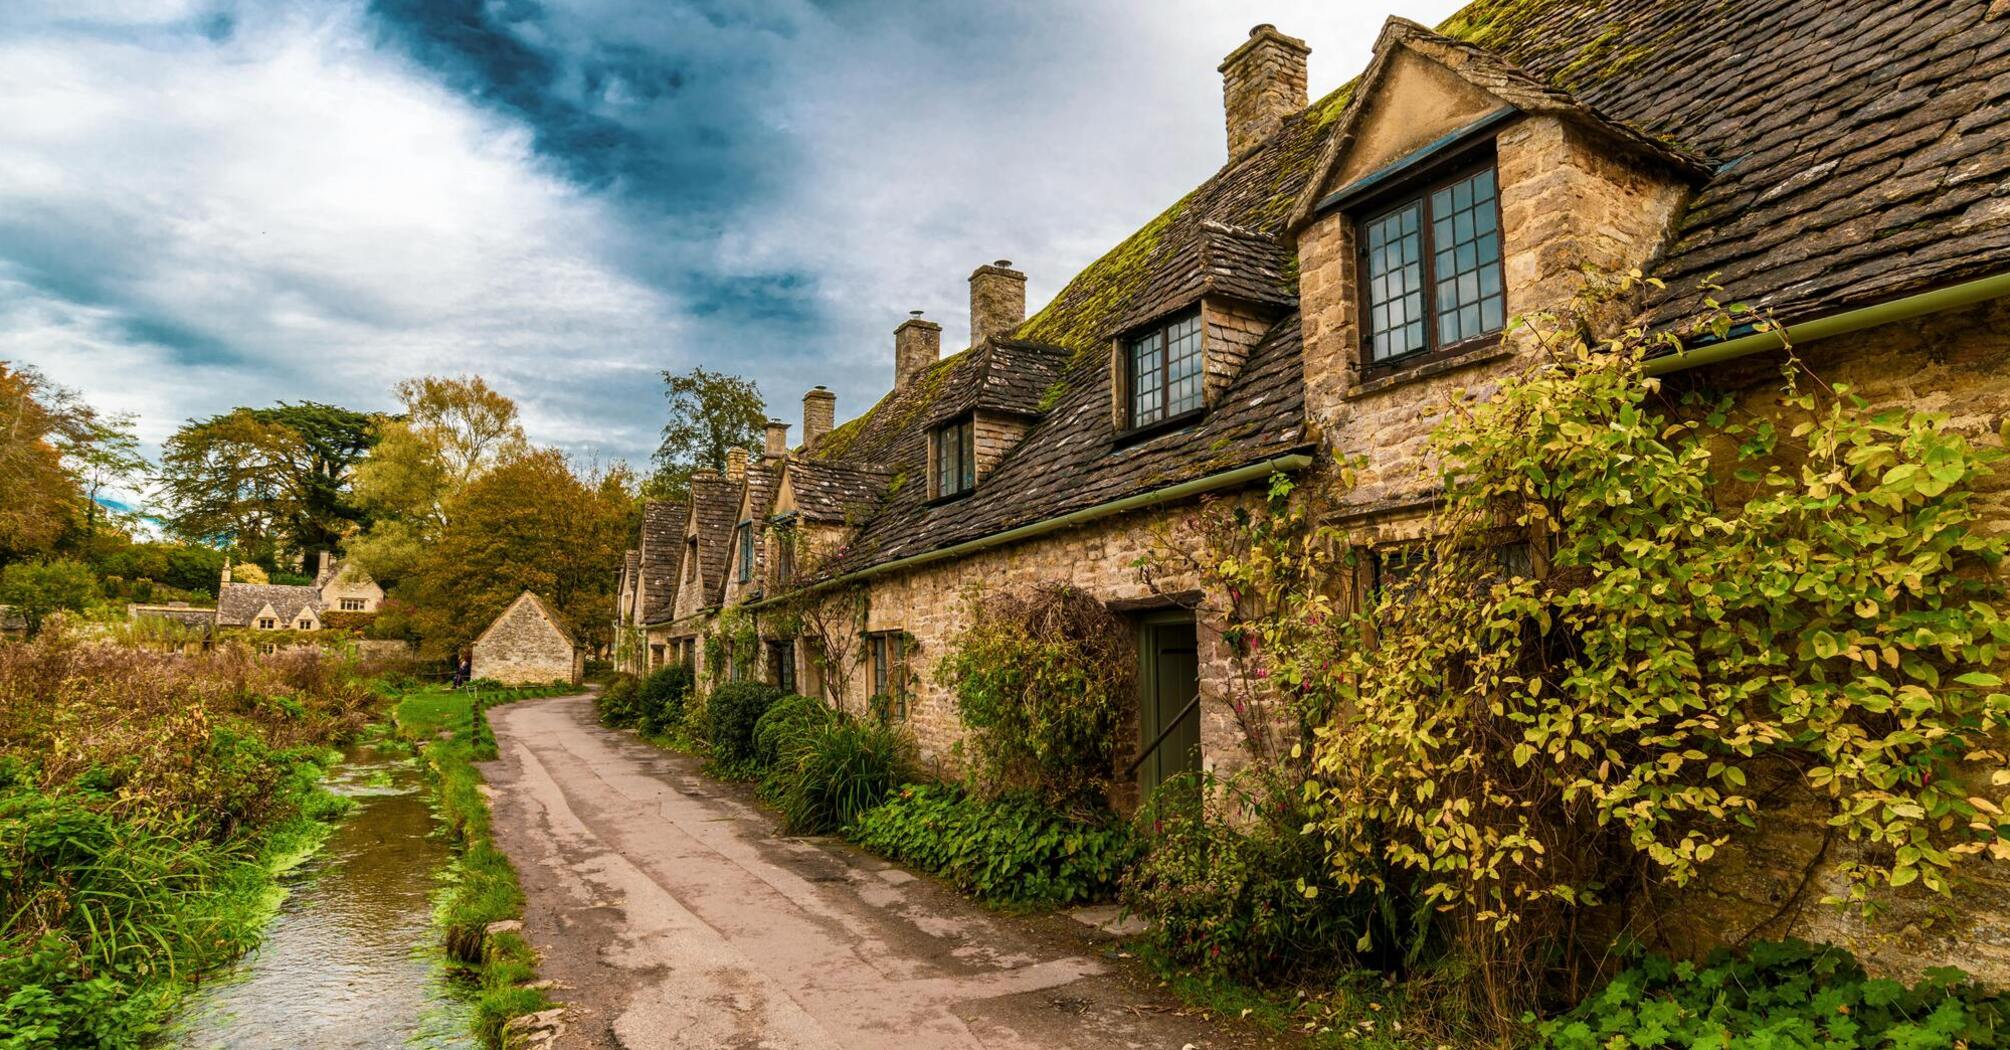 The village of Bibury in the Cotswolds is one of the most beautiful in the world